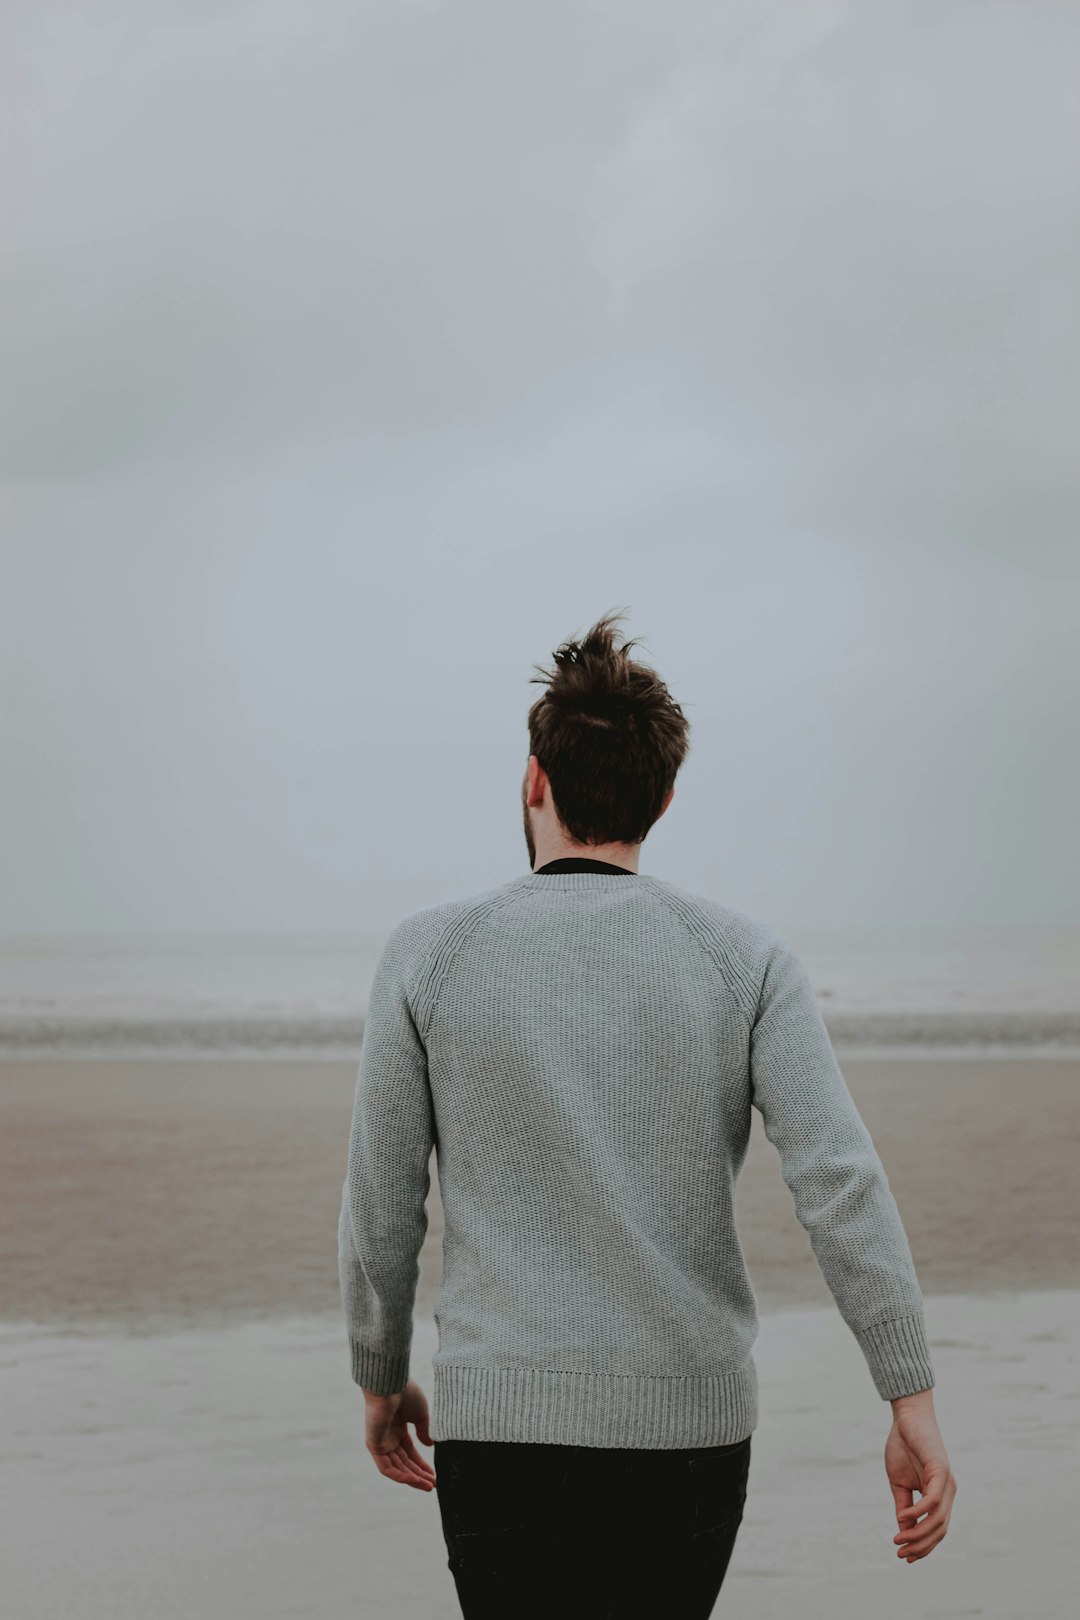 woman in gray long sleeve shirt standing on beach during daytime